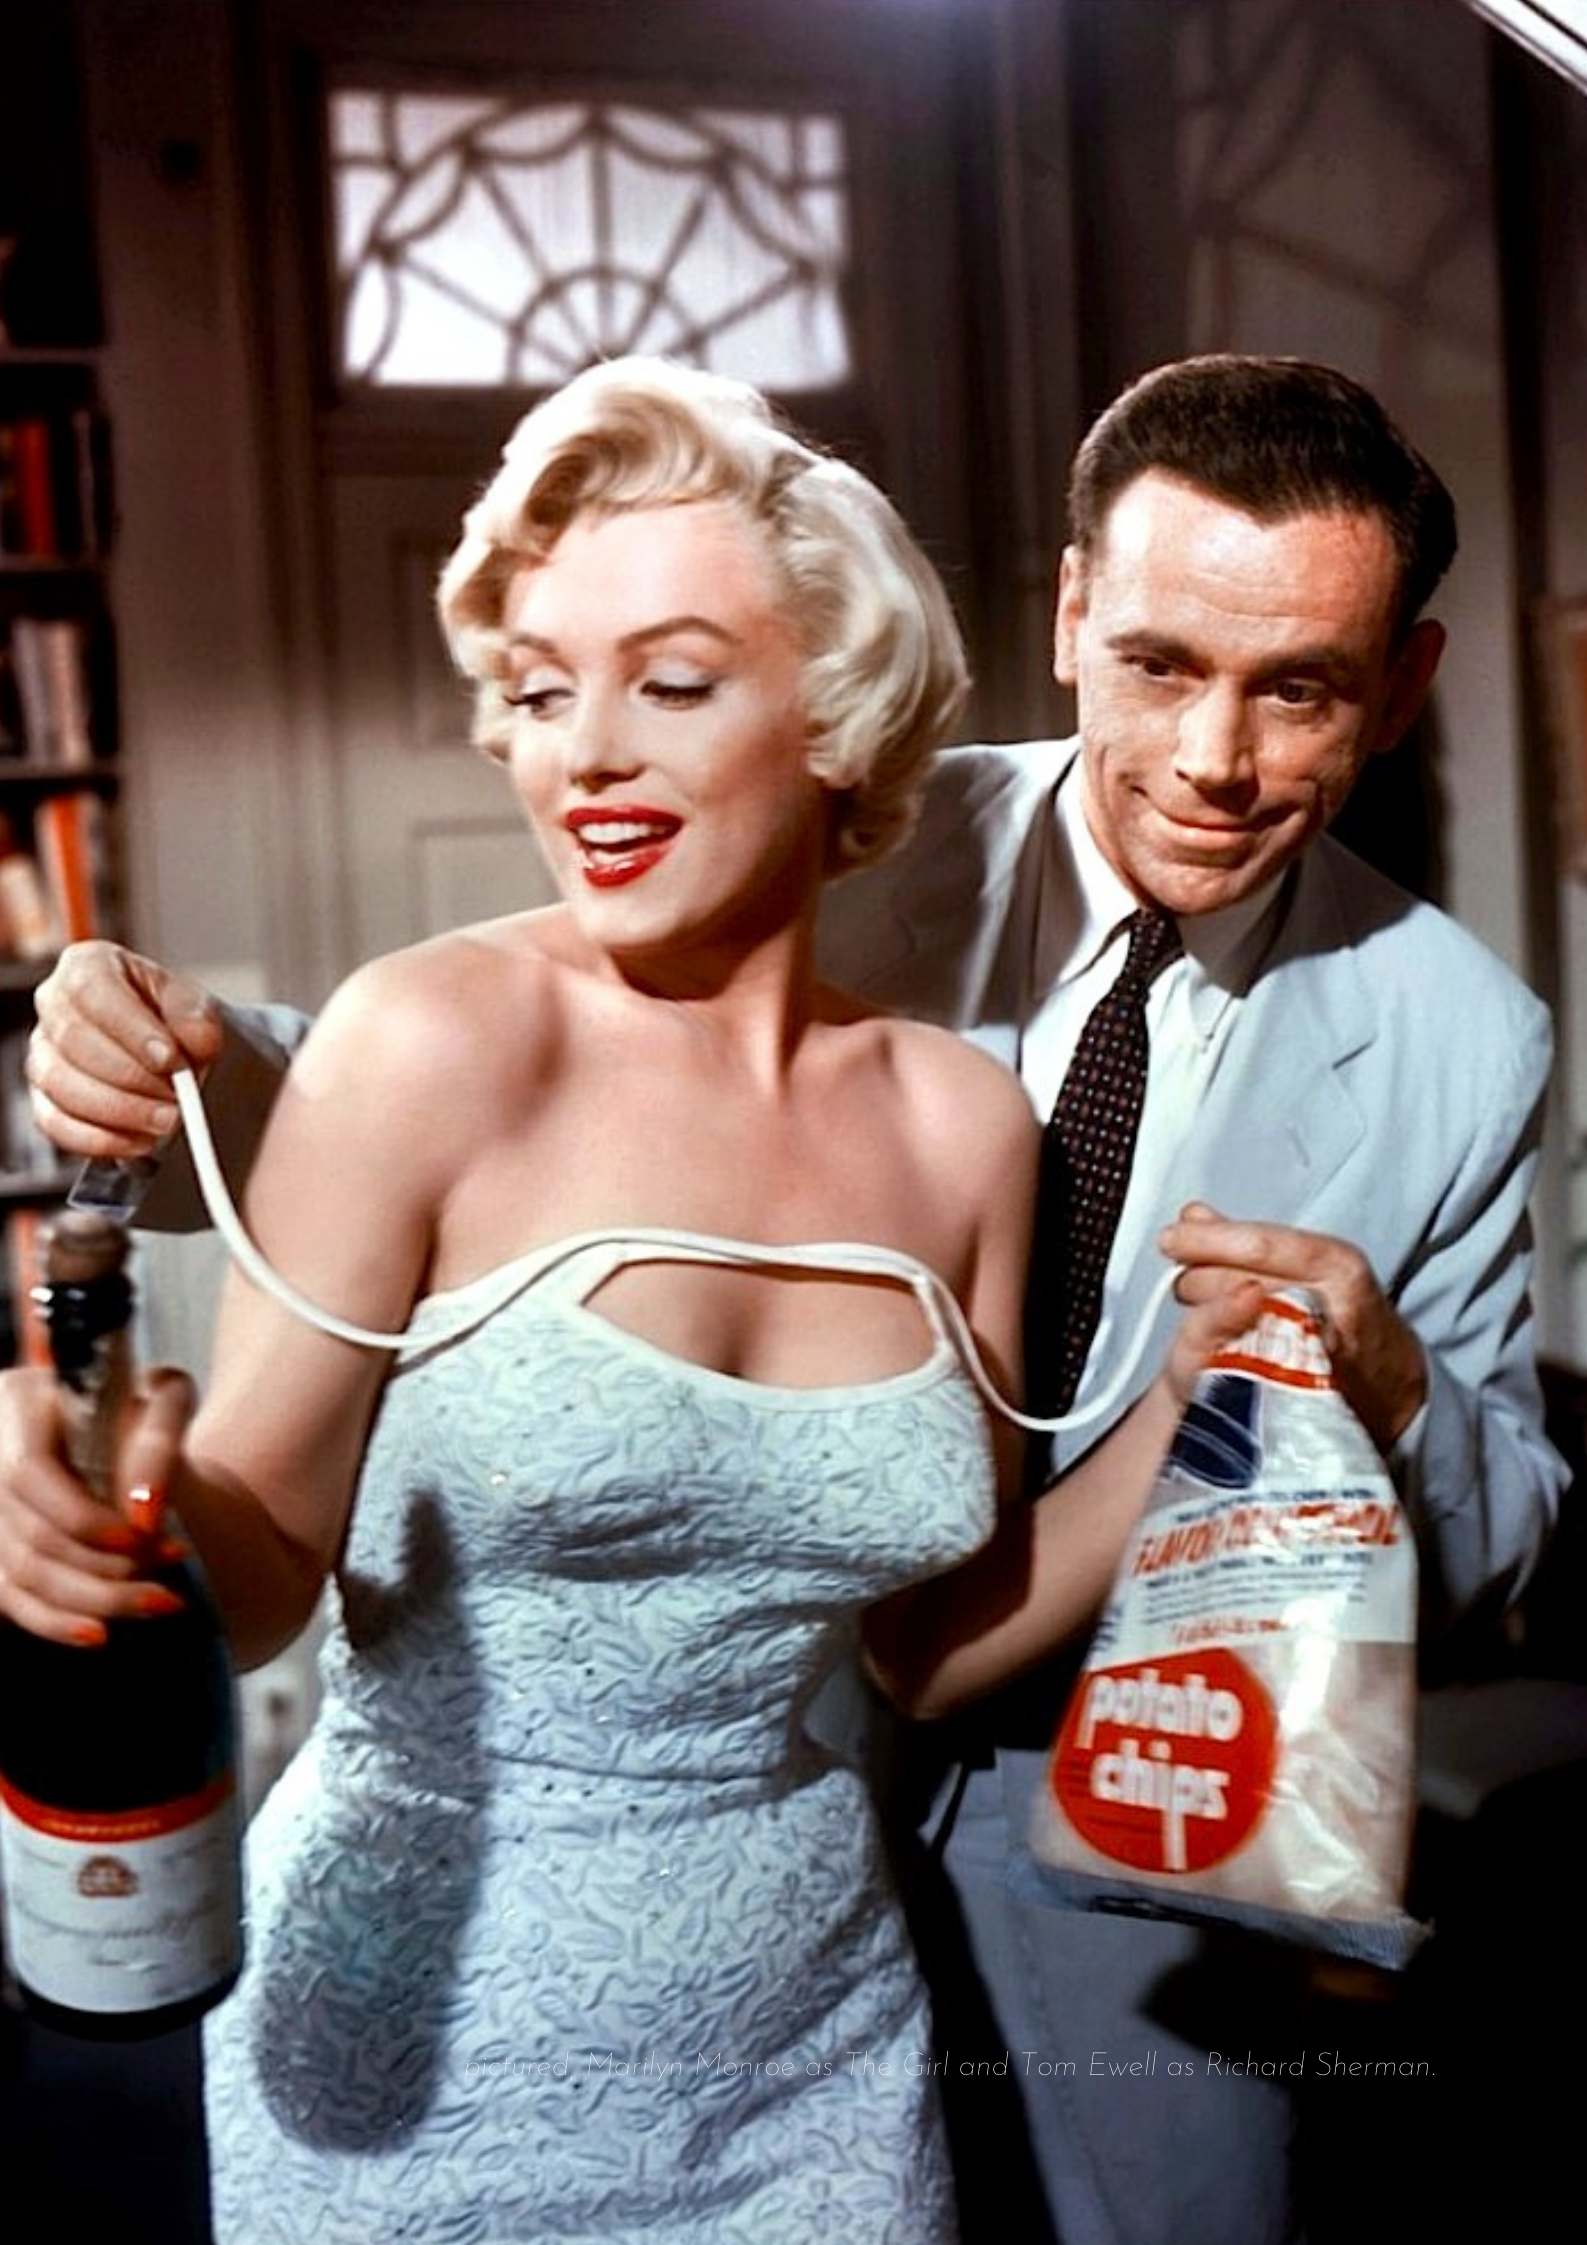 What Is the Seven-Year Itch? - Meaning & Origin